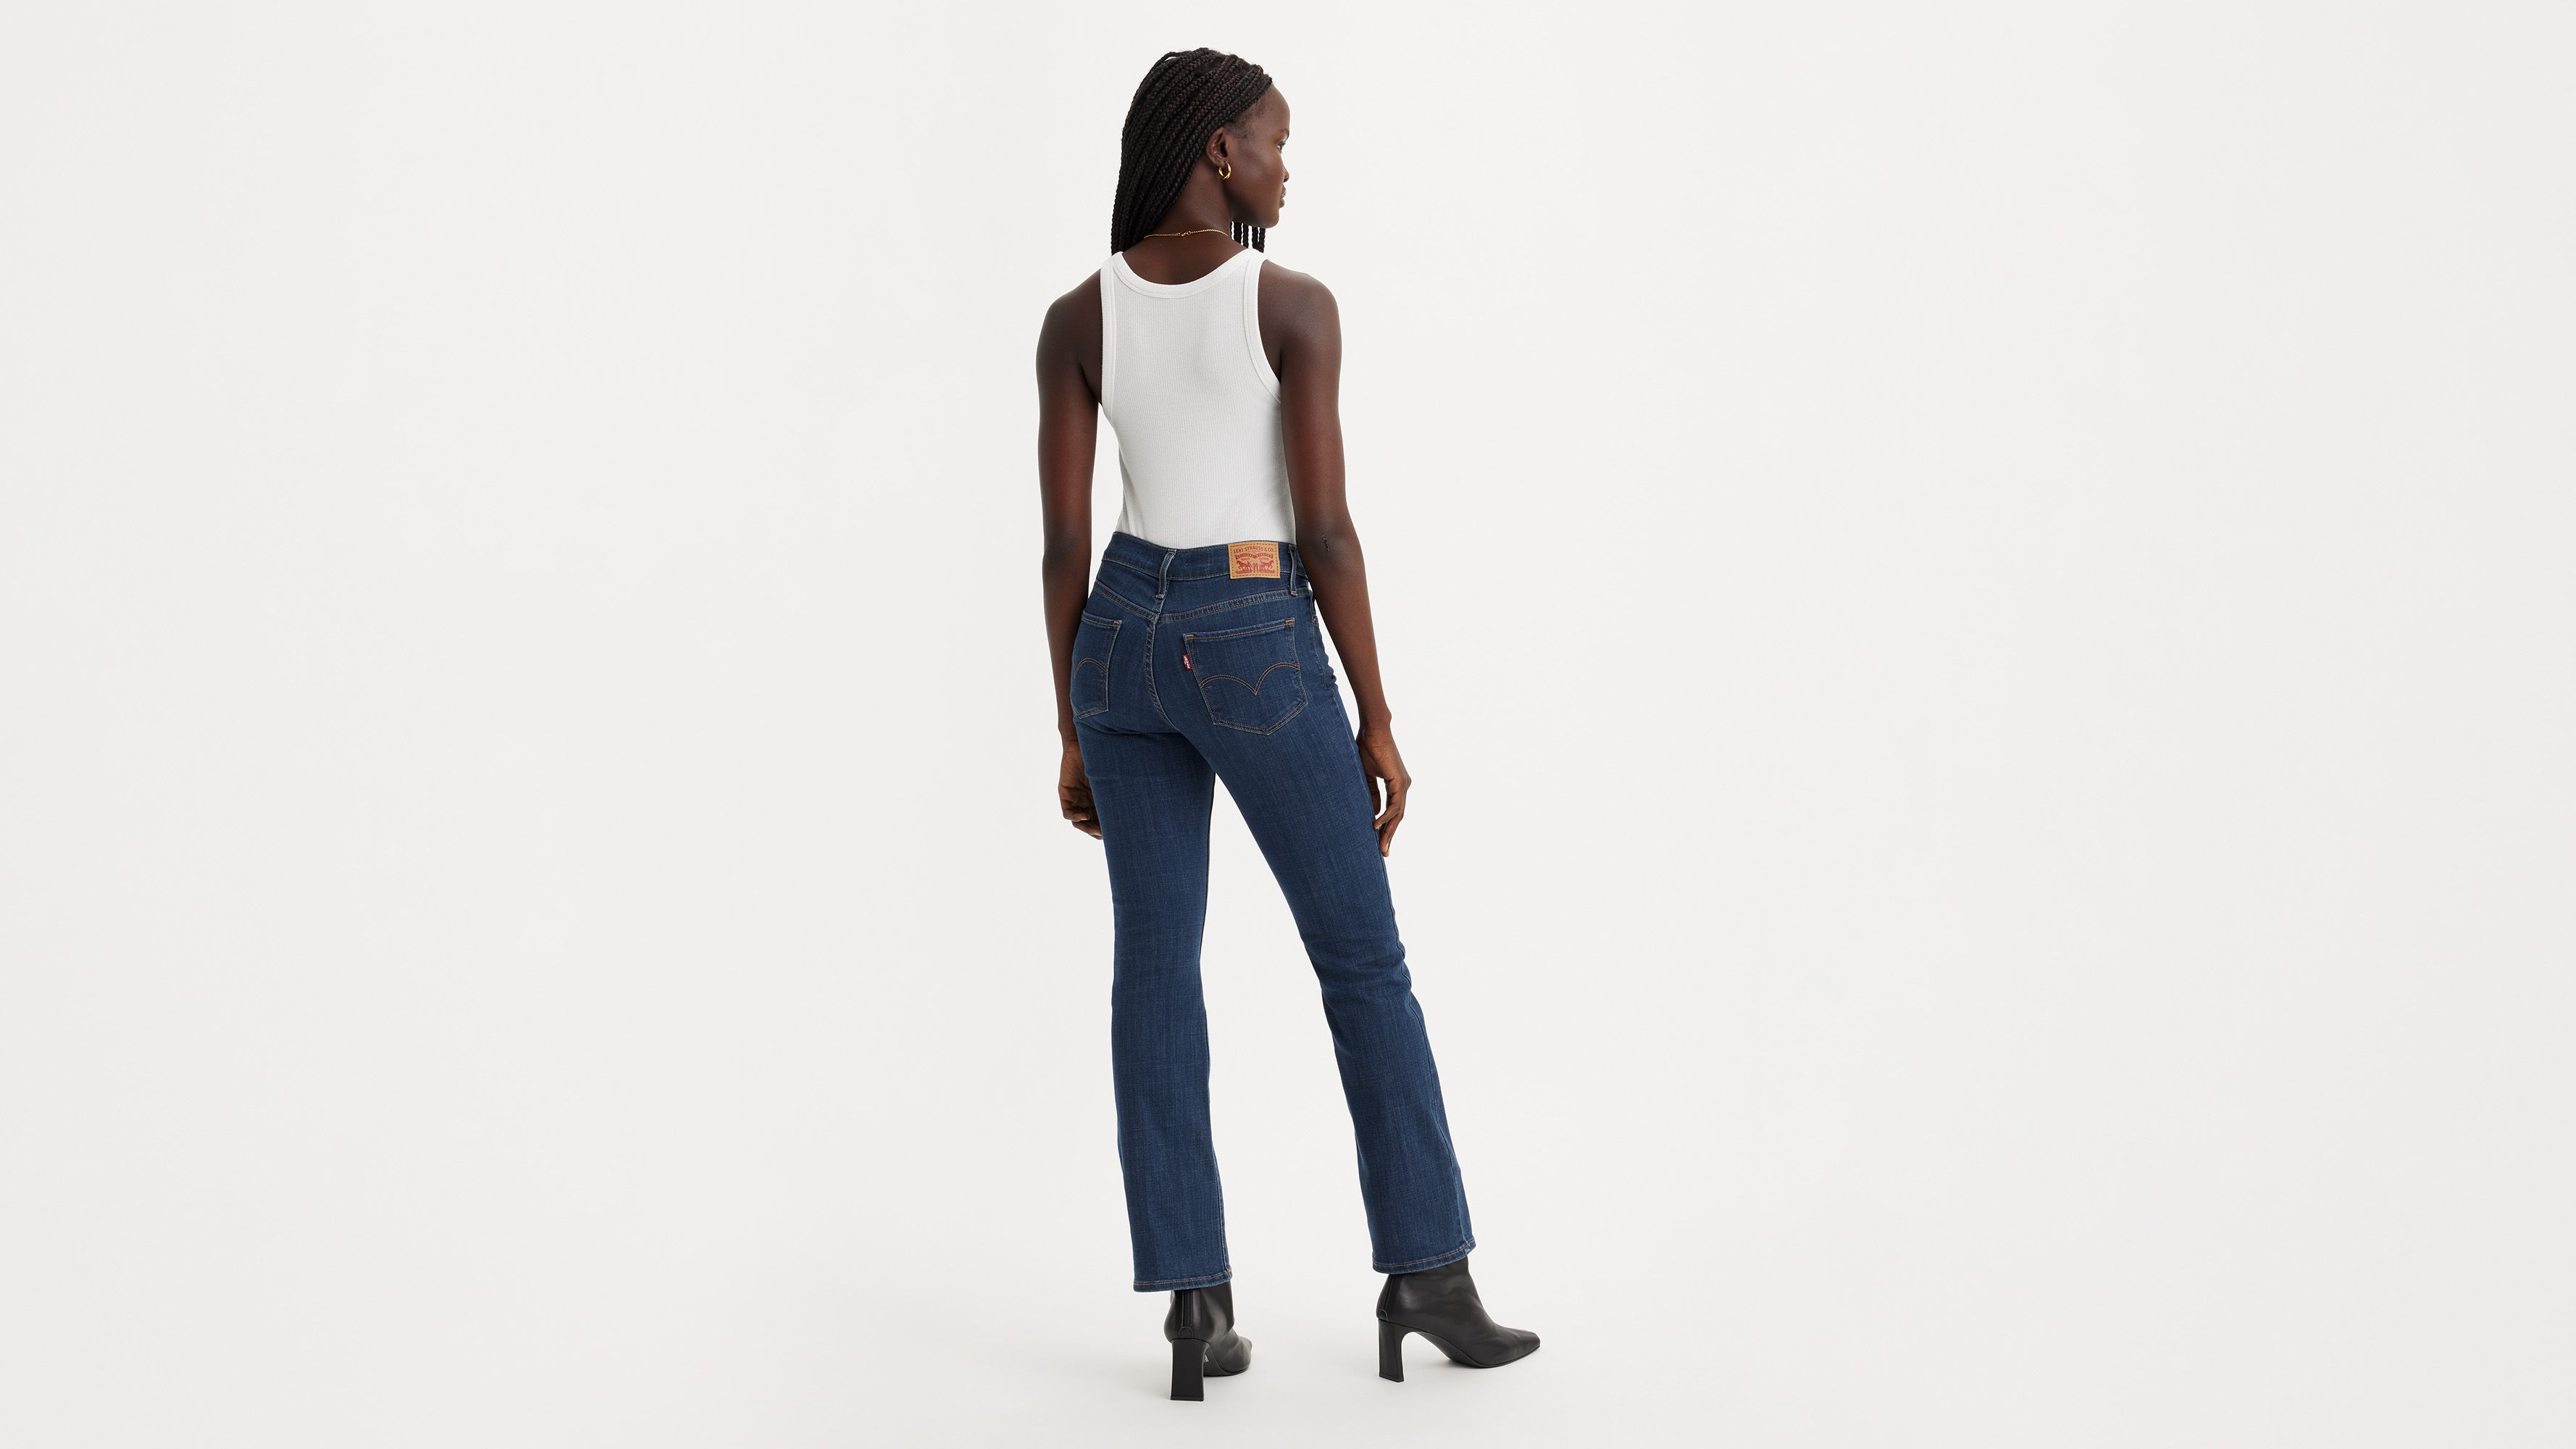 Levi's® Bootcut jeans 315 SHAPING BOOTCUT in 76 med indigo - worn in